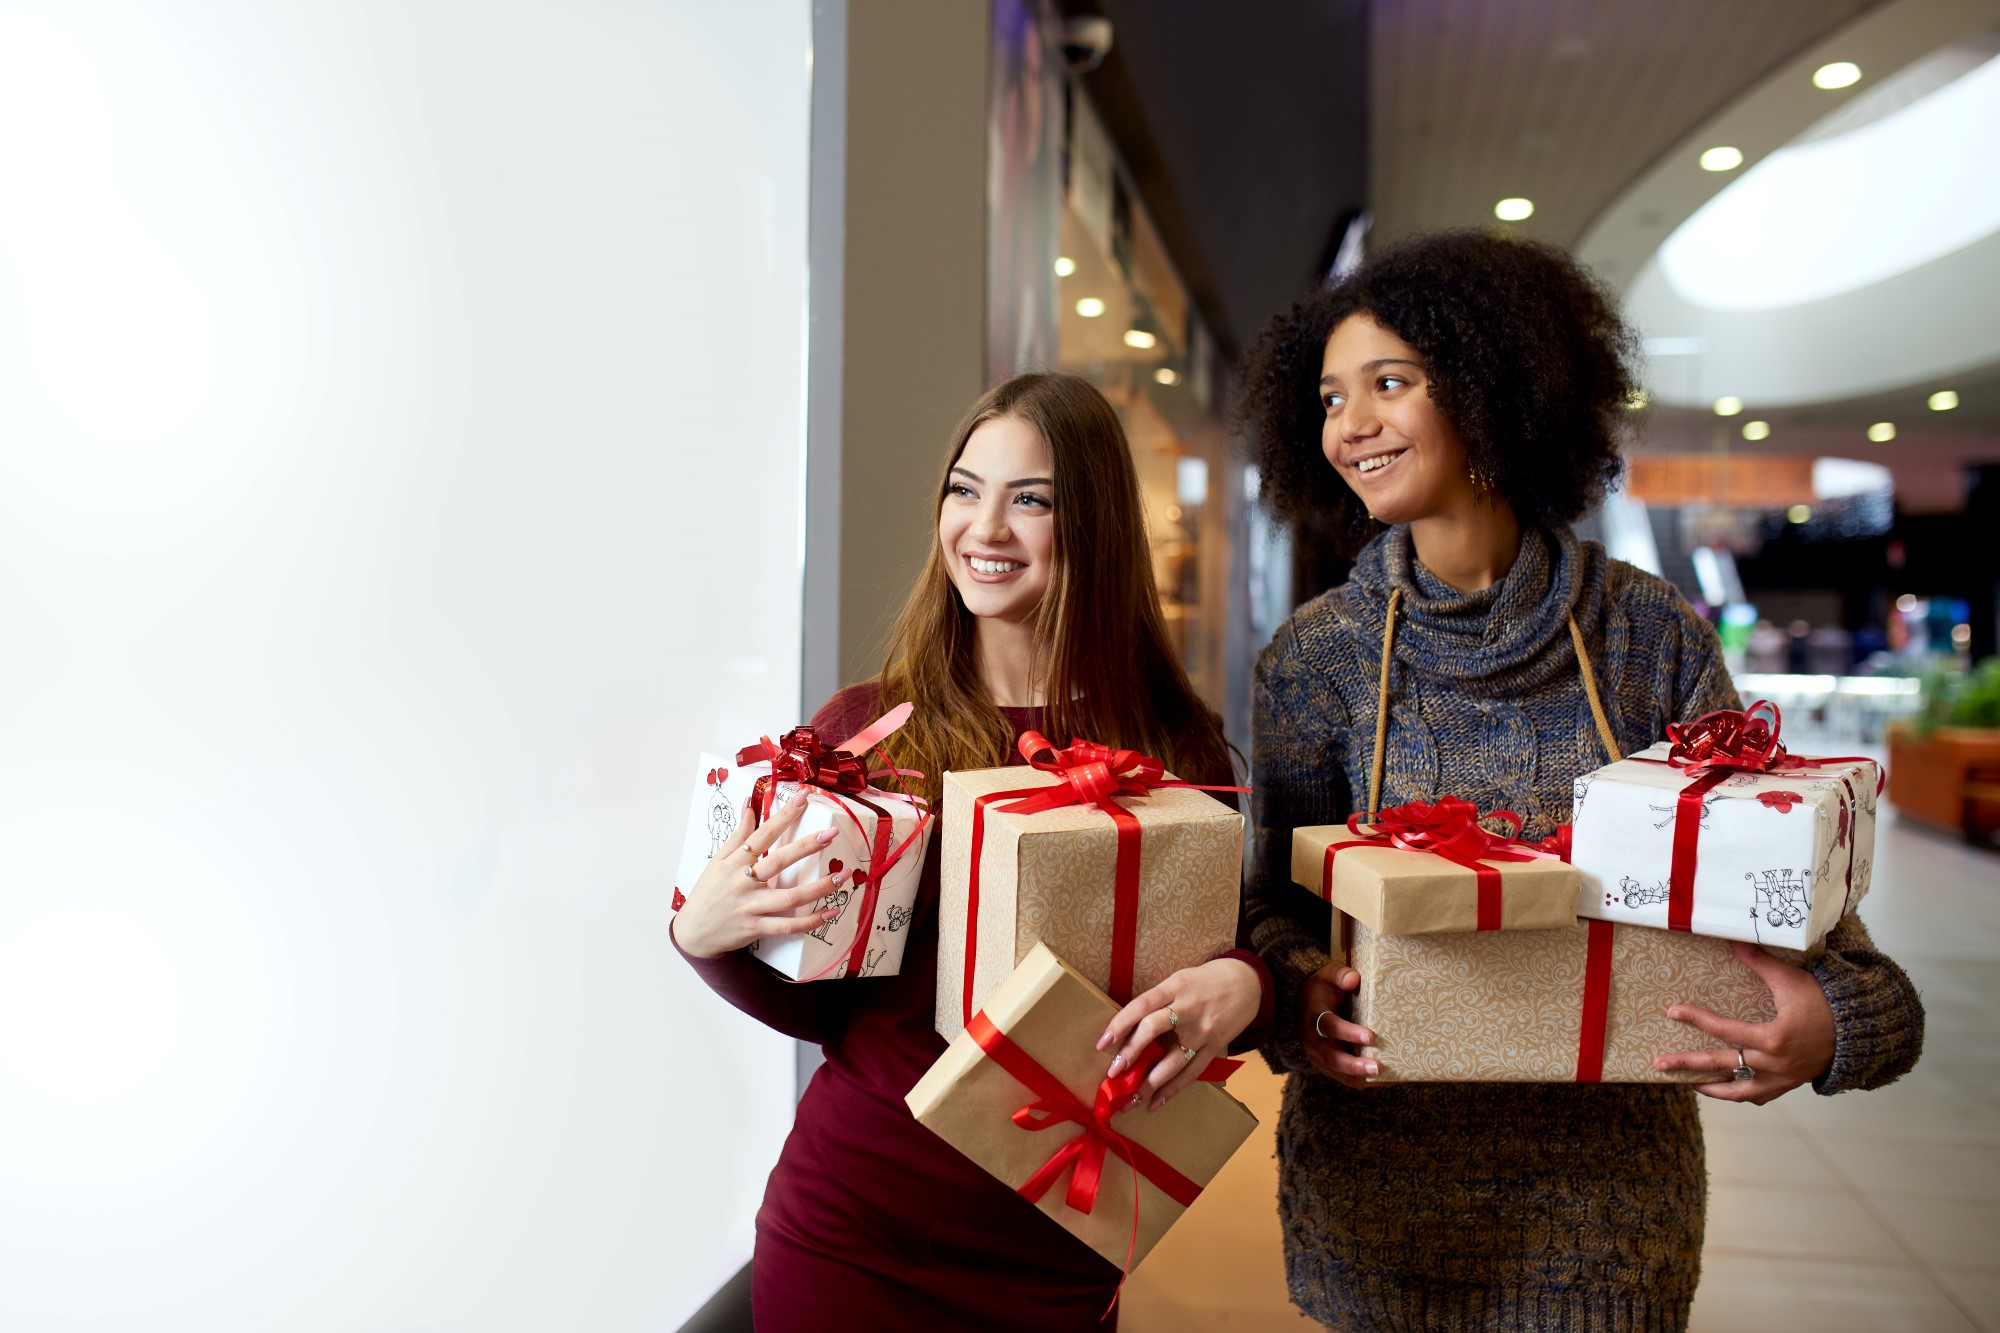 Two young ladies, White and African carrying holiday gifts at a Mall - manage money during the holiday season